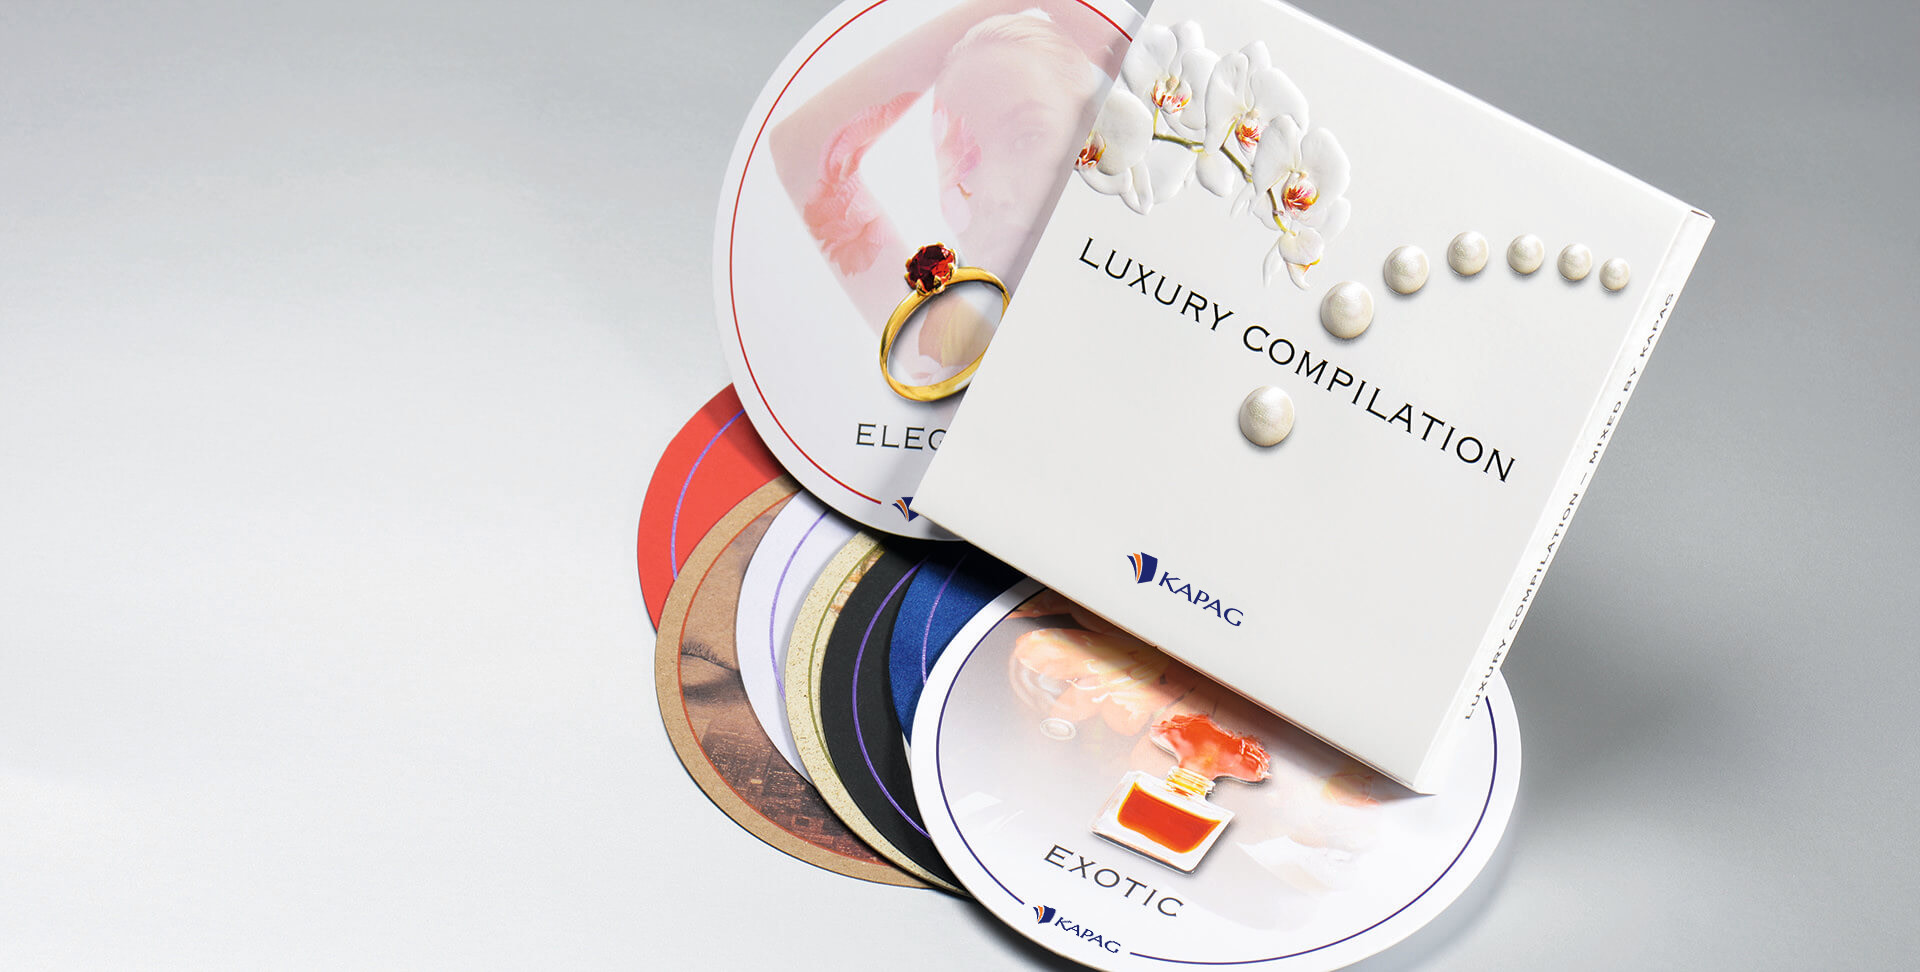 The Luxury Compilation collection